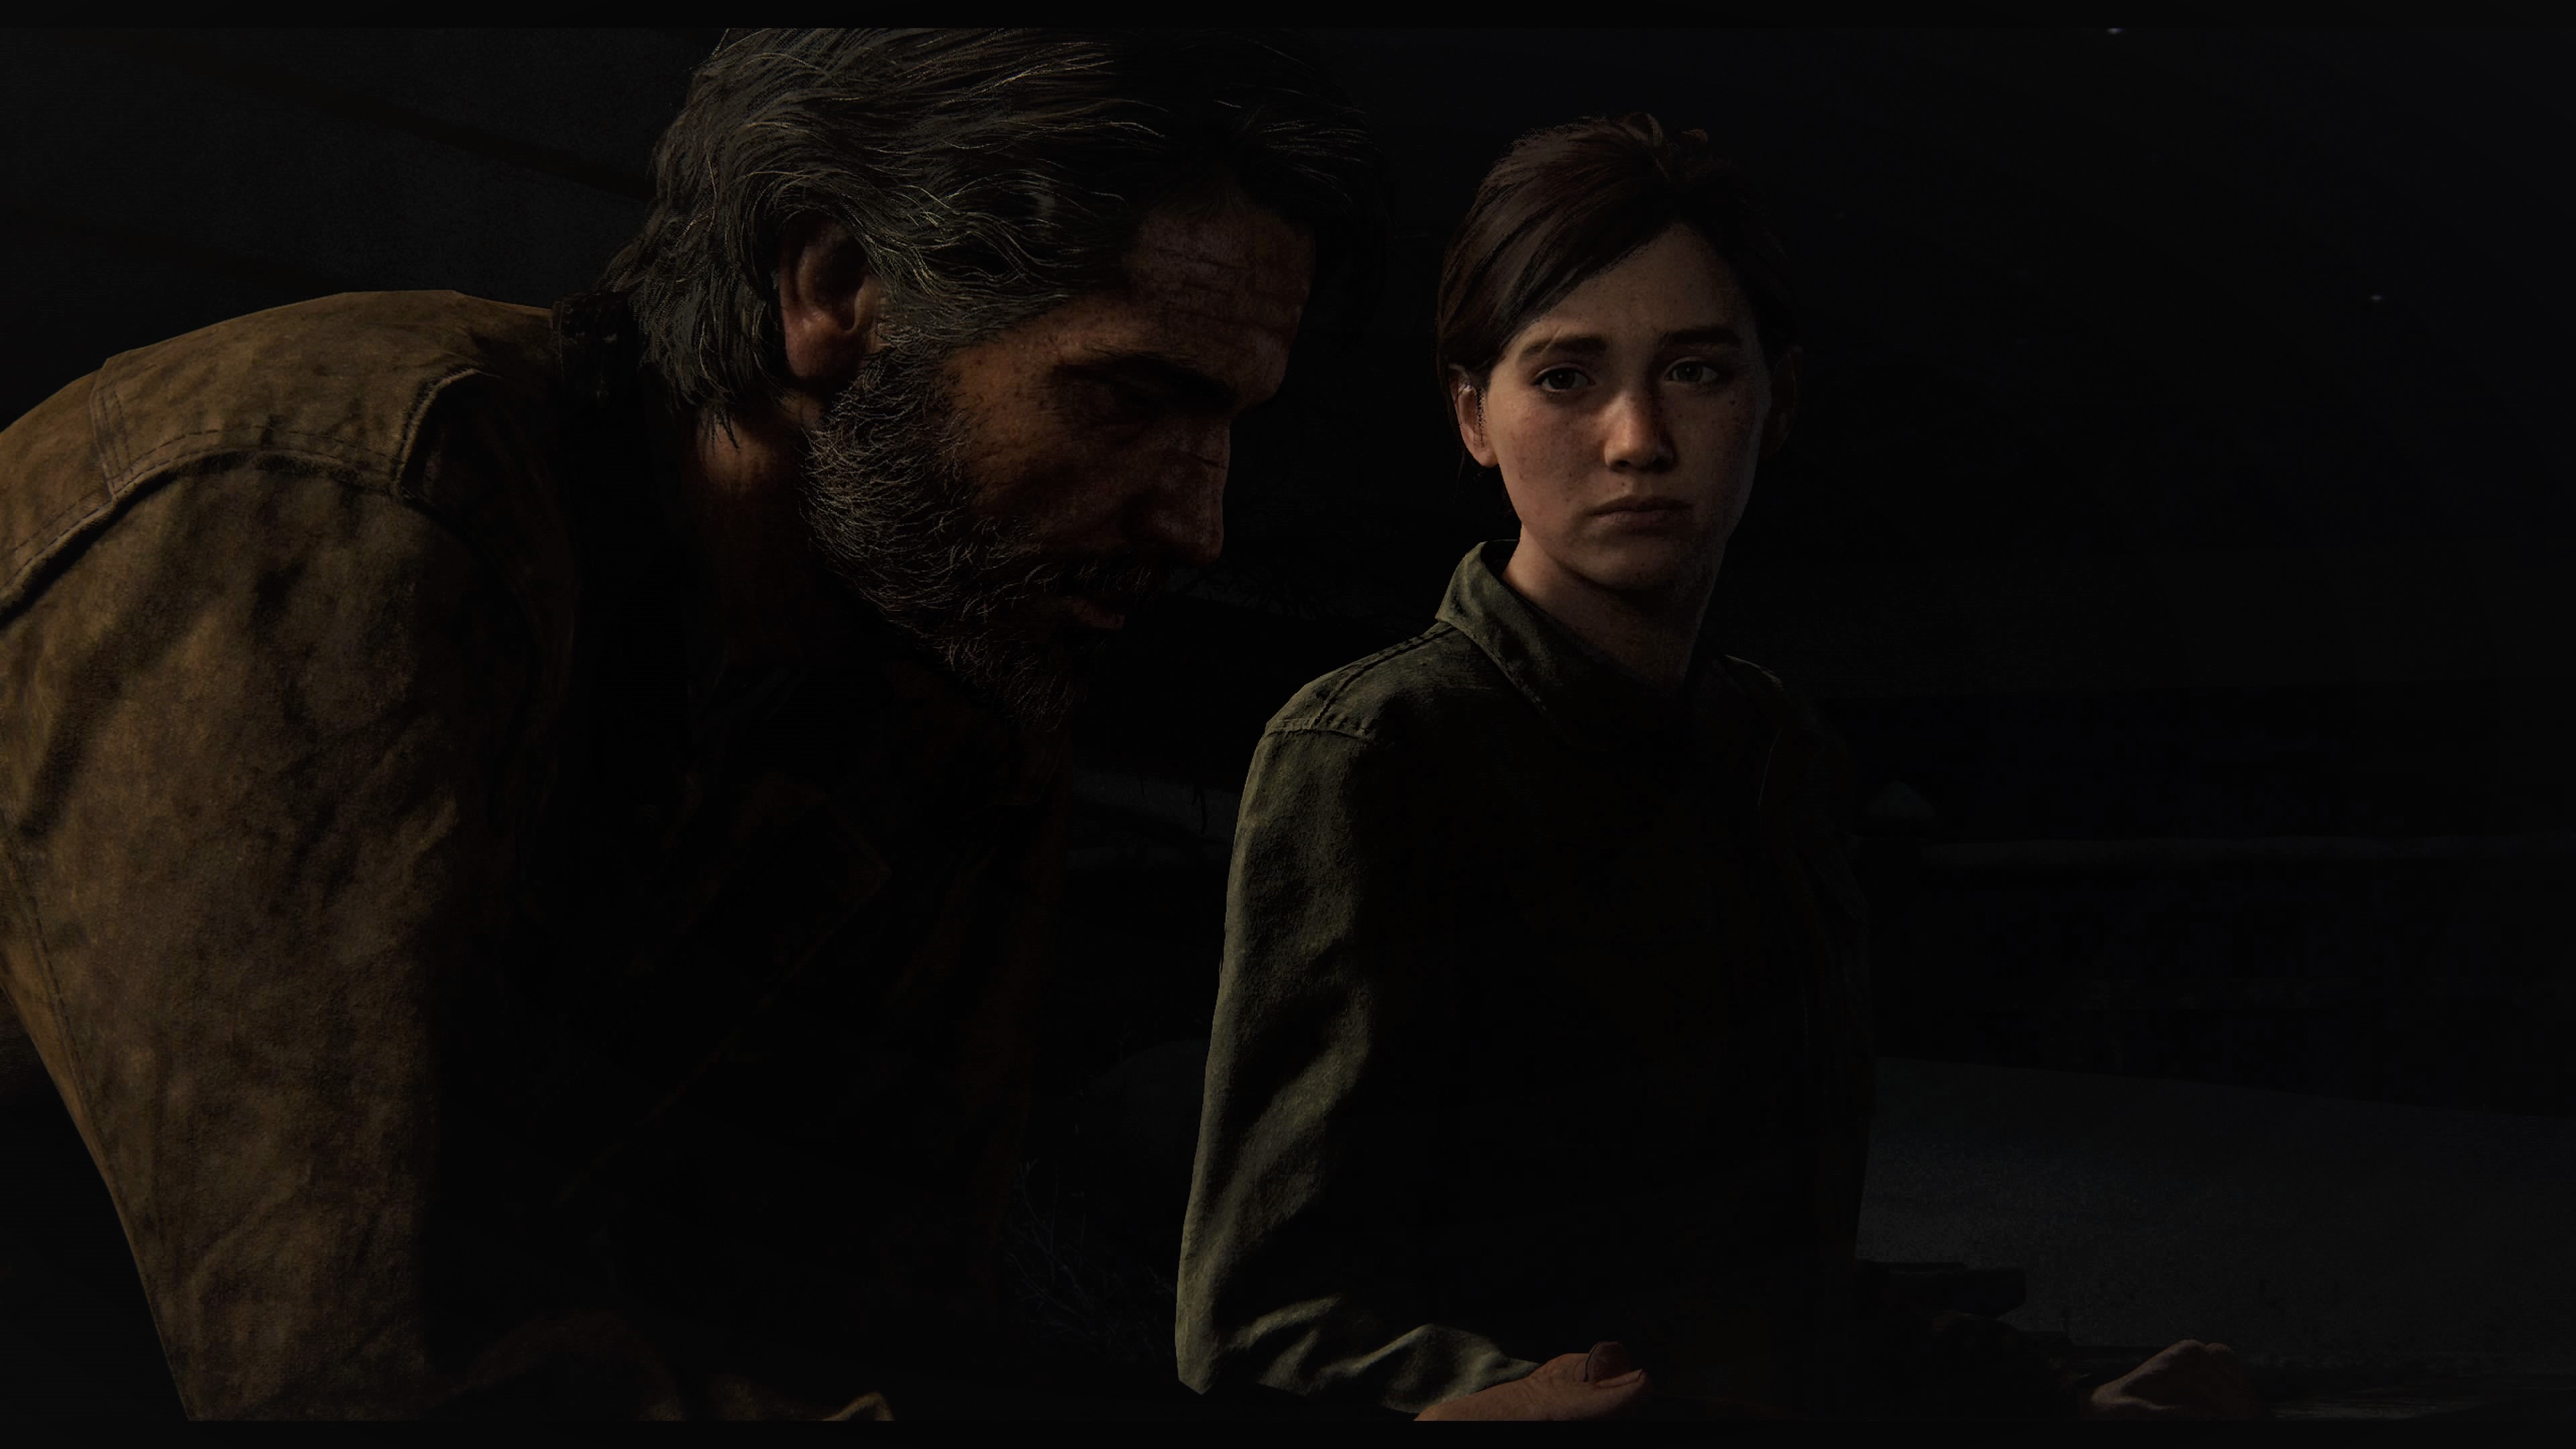 Wallpaper : The Last of Us, The Last of Us 2, Naughty Dog